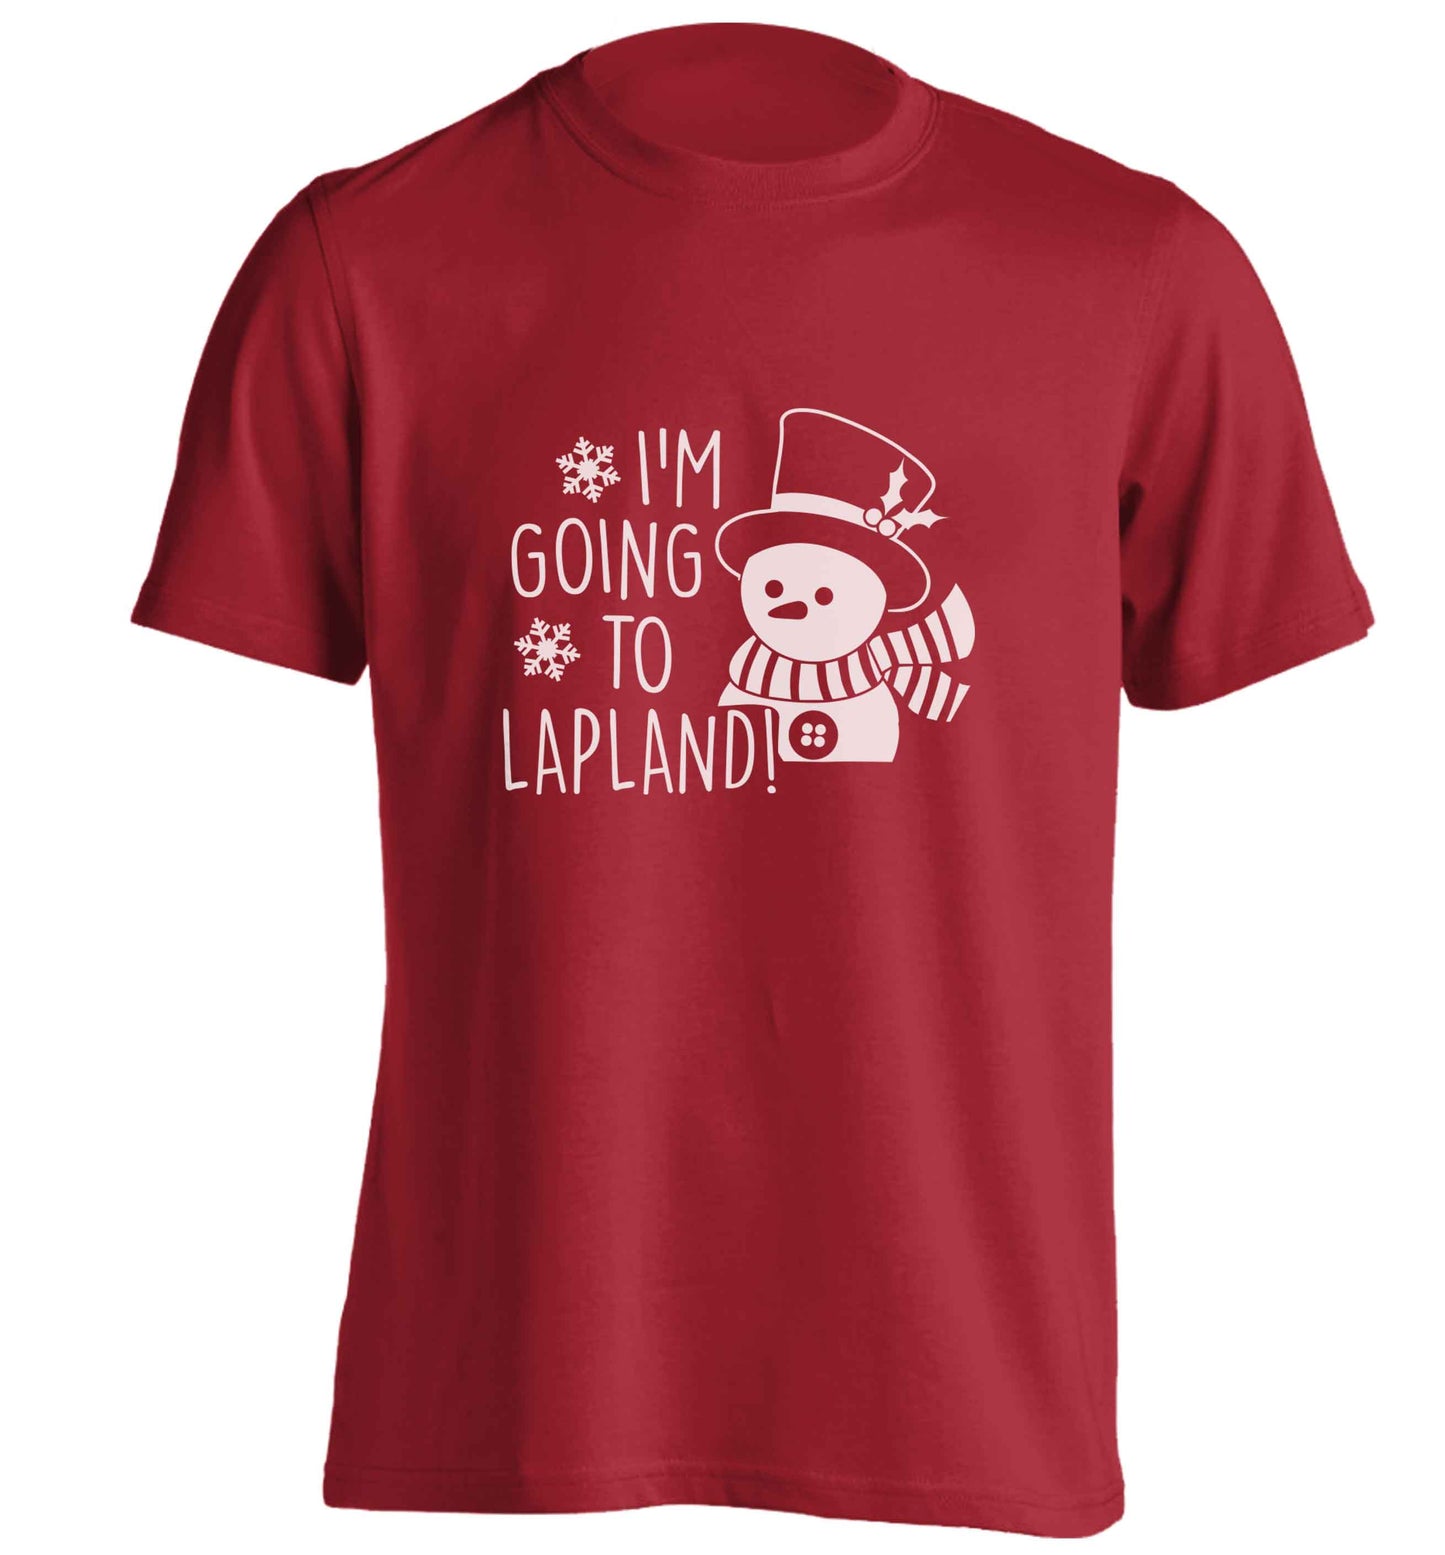 I'm going to Lapland adults unisex red Tshirt 2XL